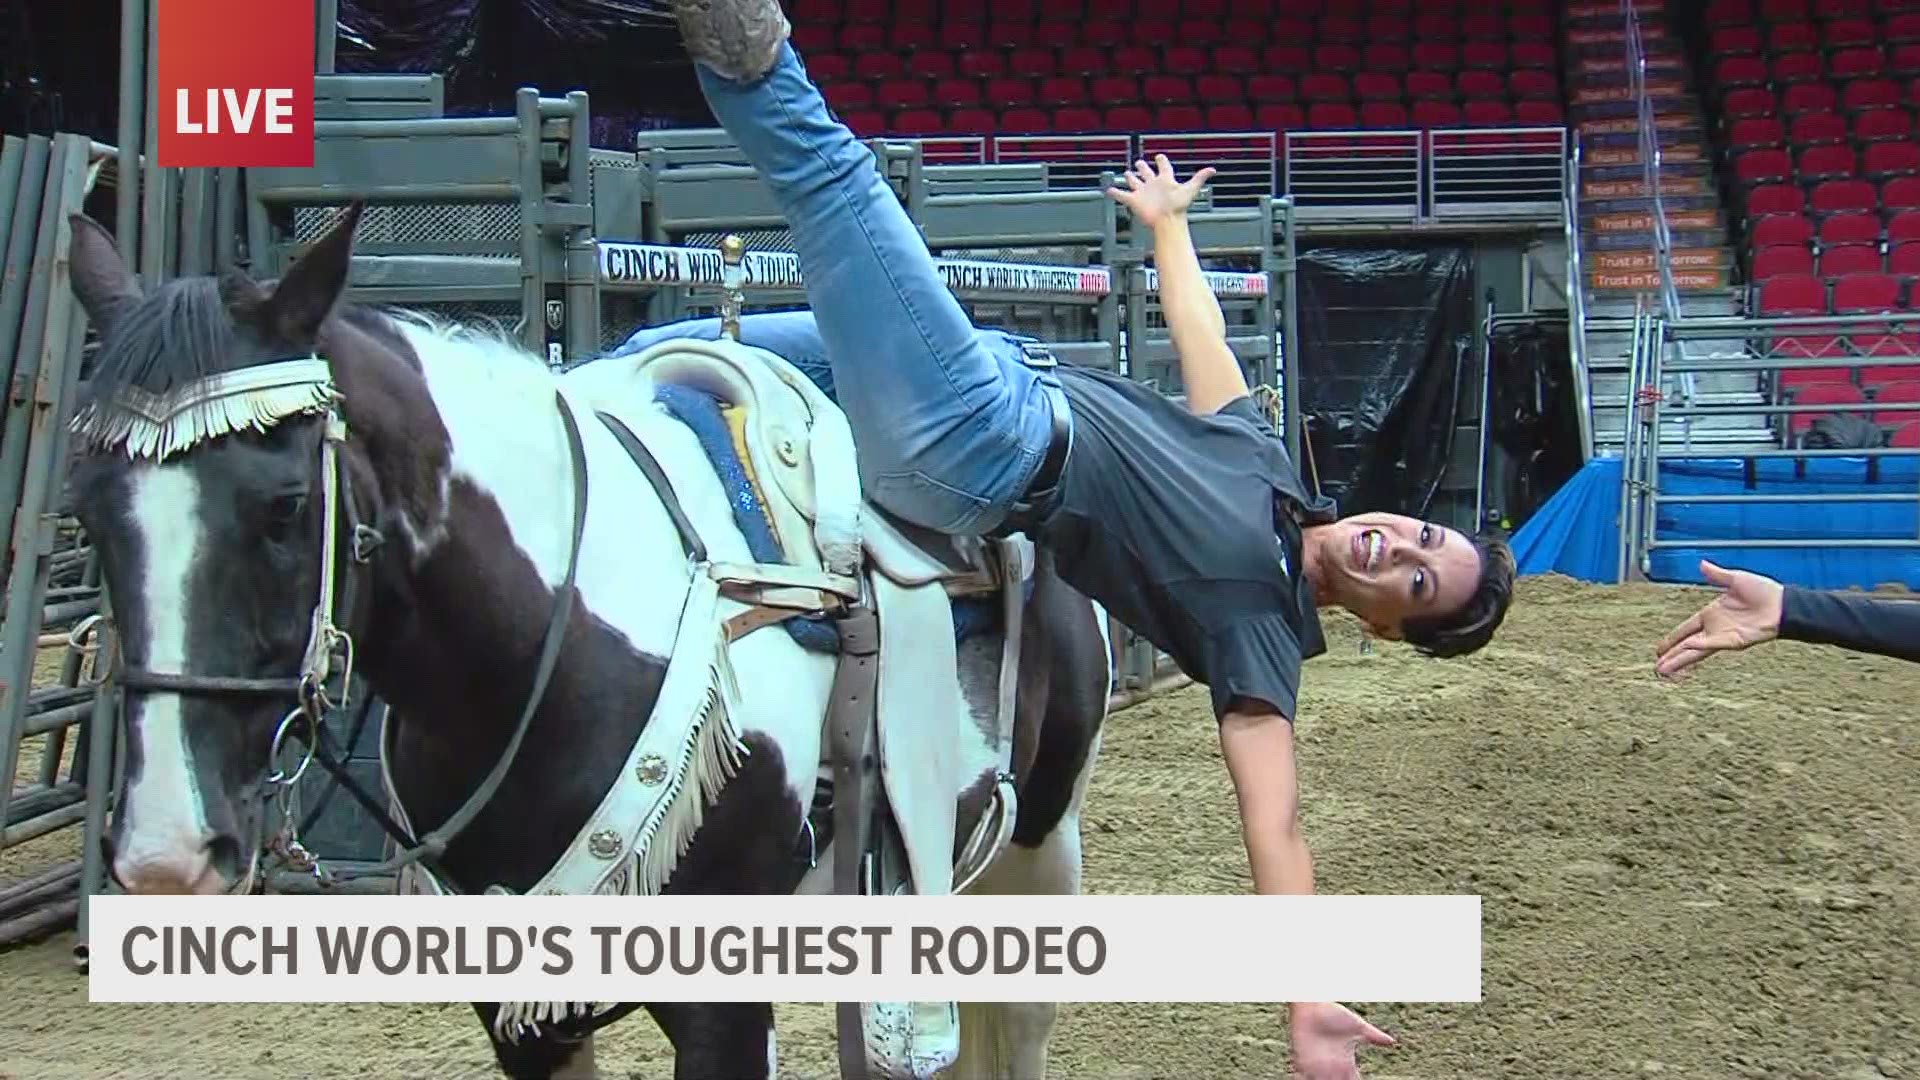 Cinch World's Toughest Rodeo is back at Wells Fargo Arena with two shows on Saturday